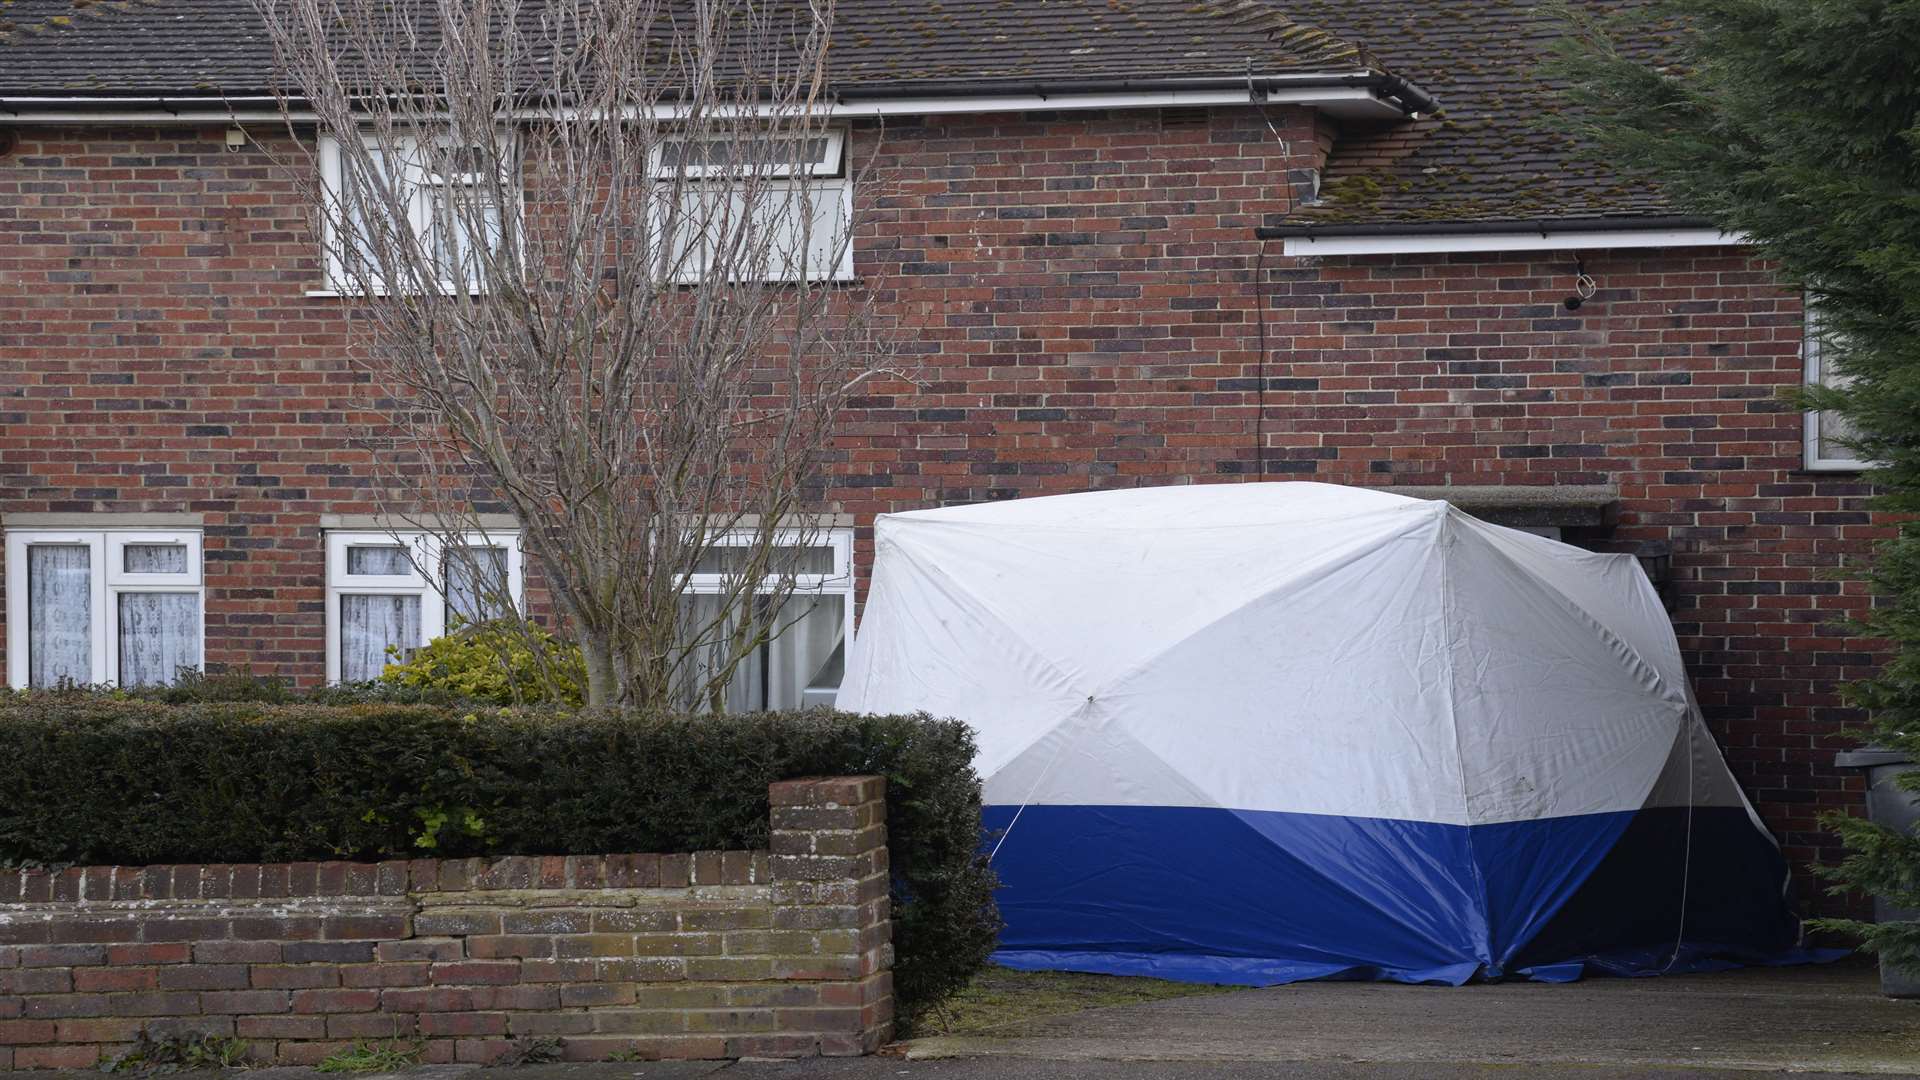 A forensics tent was set up in Dickens Avenue